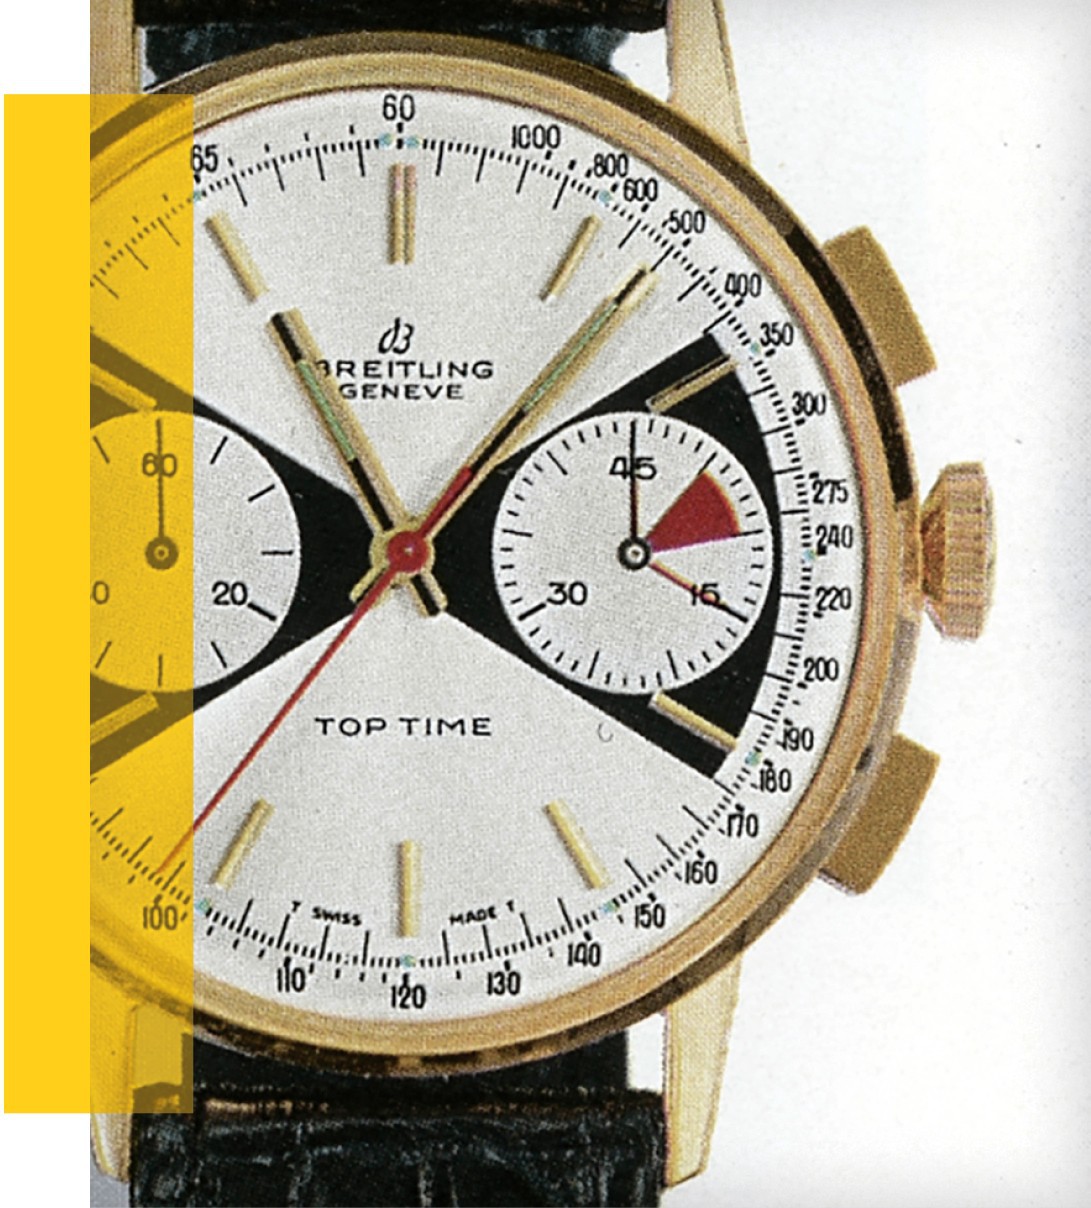 15_Original Breitling Top Time Ref. 2003 from the 1960s.jpg